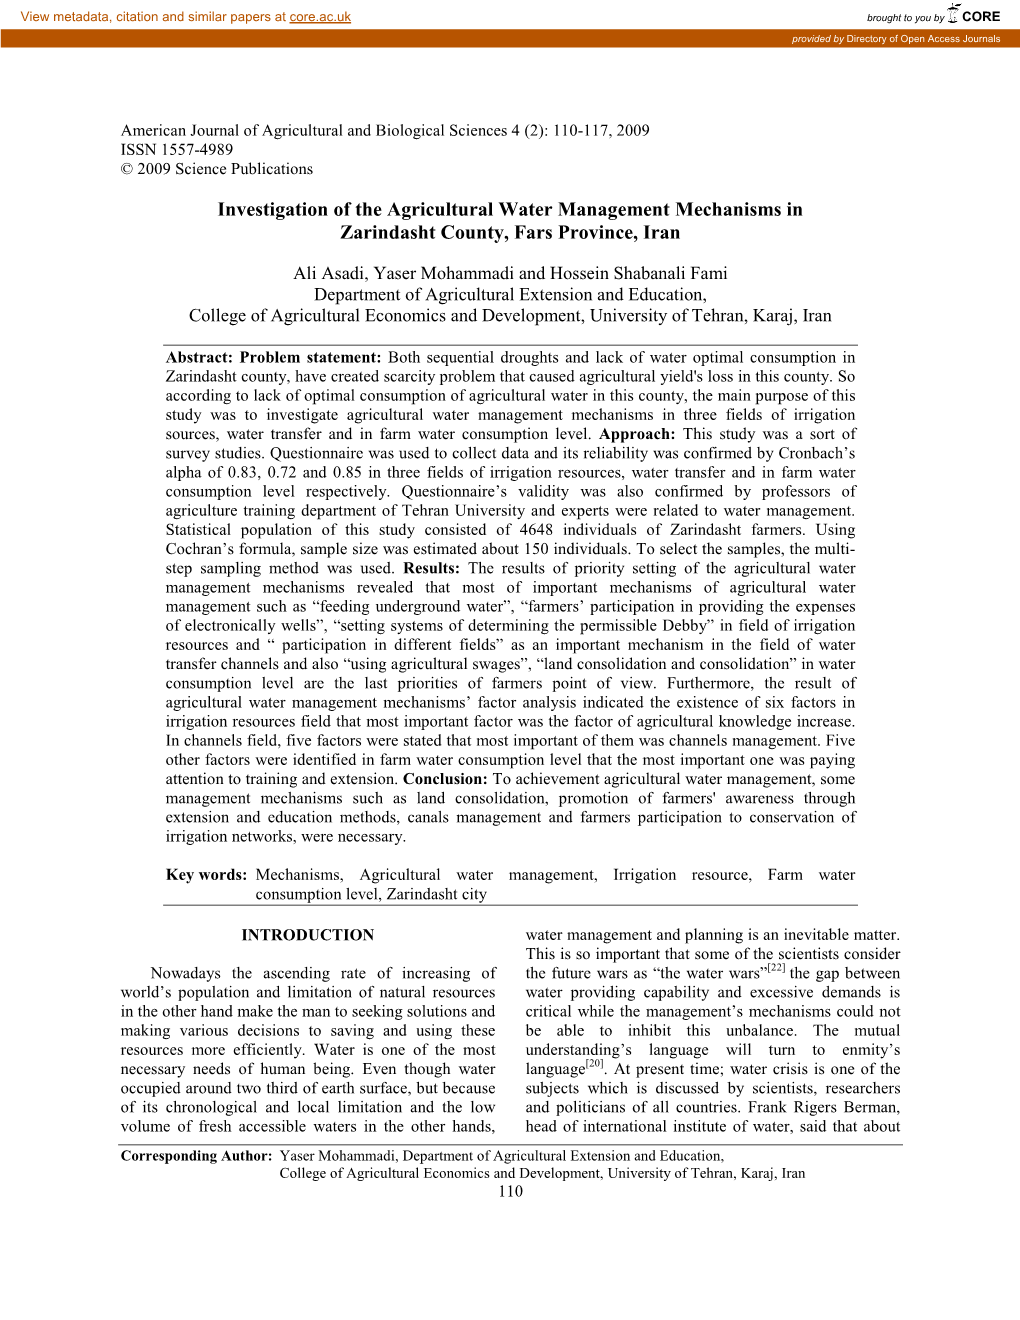 Investigation of the Agricultural Water Management Mechanisms in Zarindasht County, Fars Province, Iran